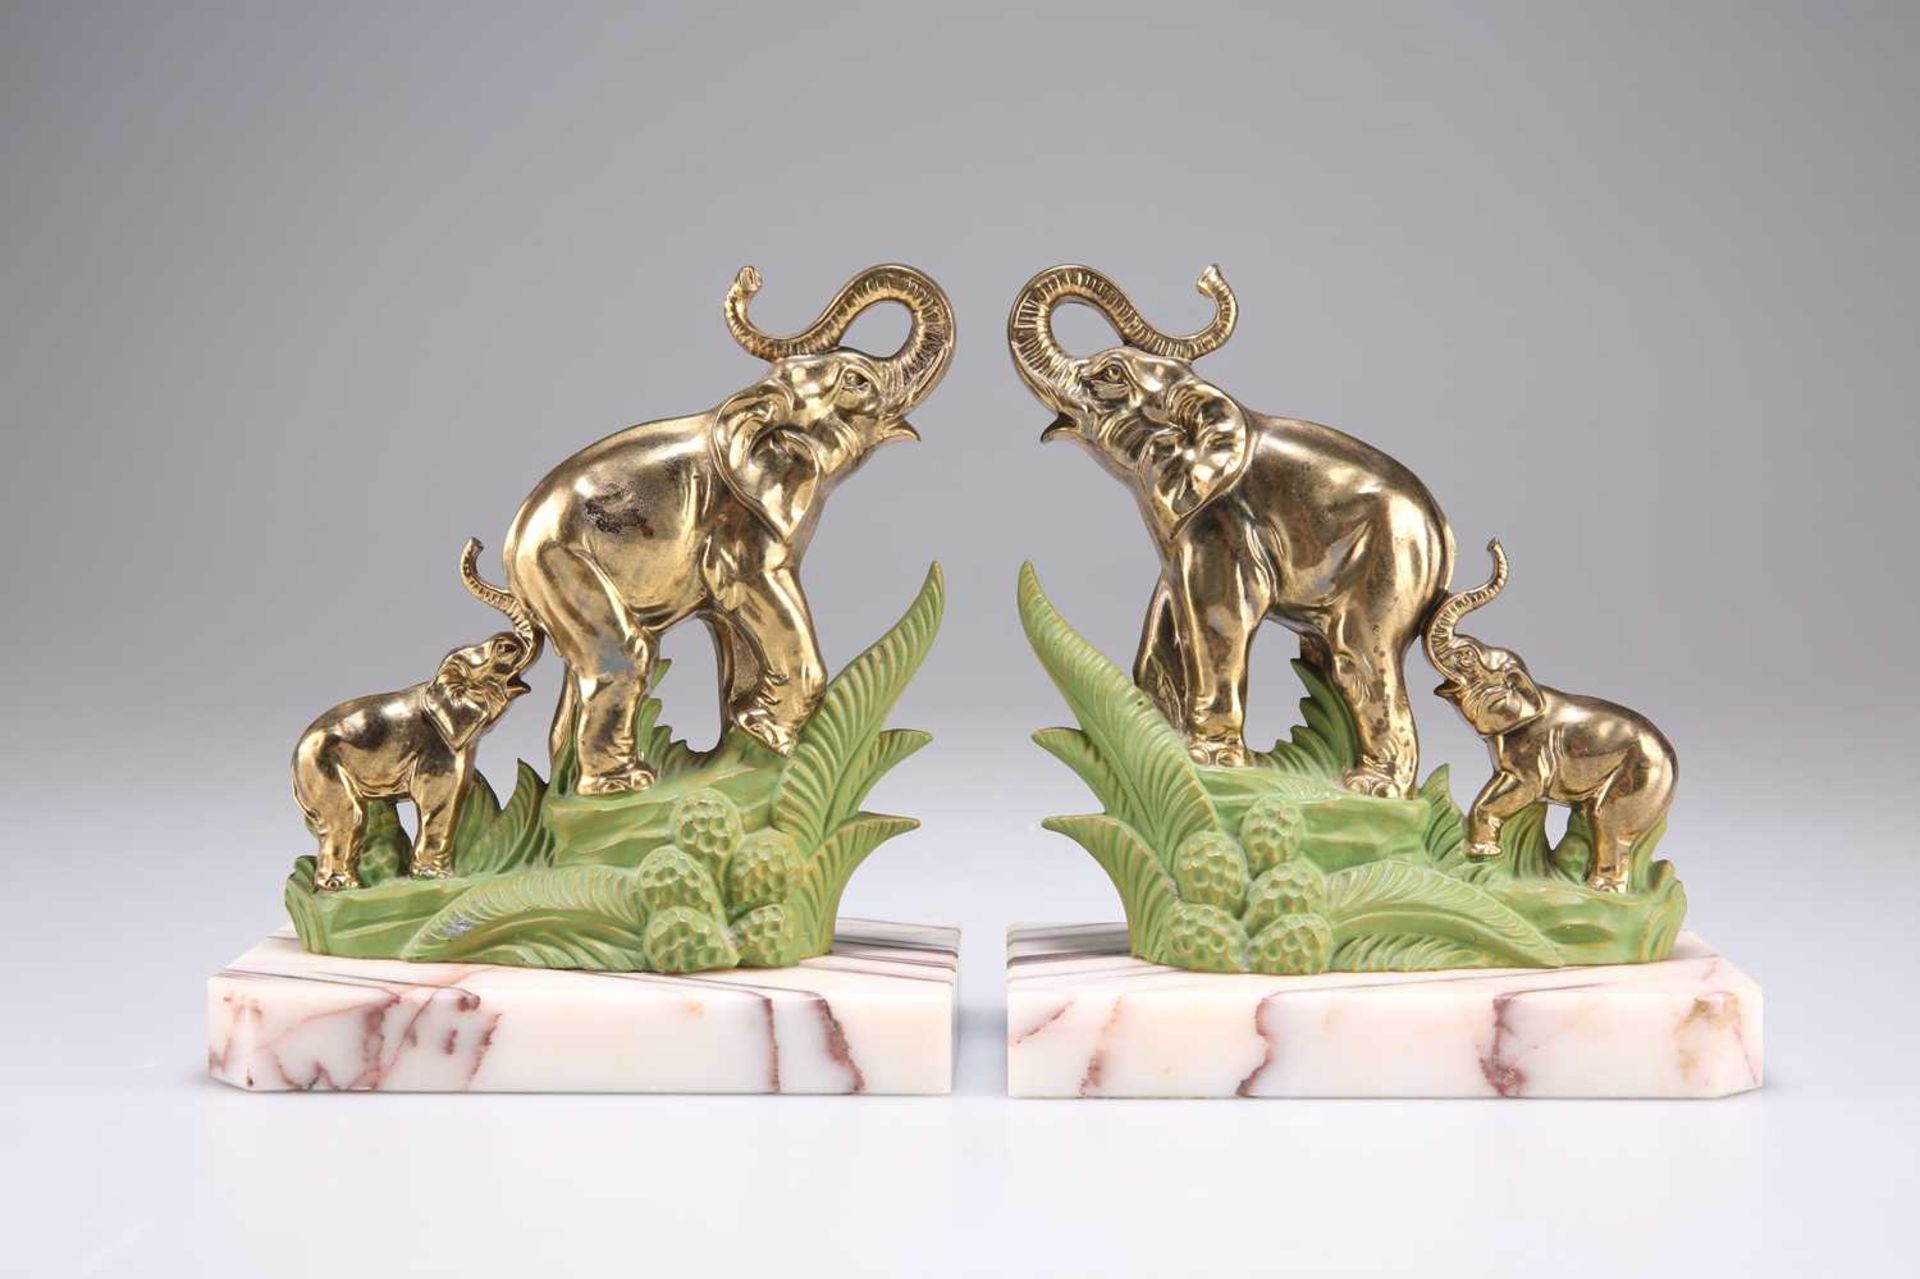 A PAIR OF ART DECO BRASS AND PAINTED 'ELEPHANT' BOOKENDS